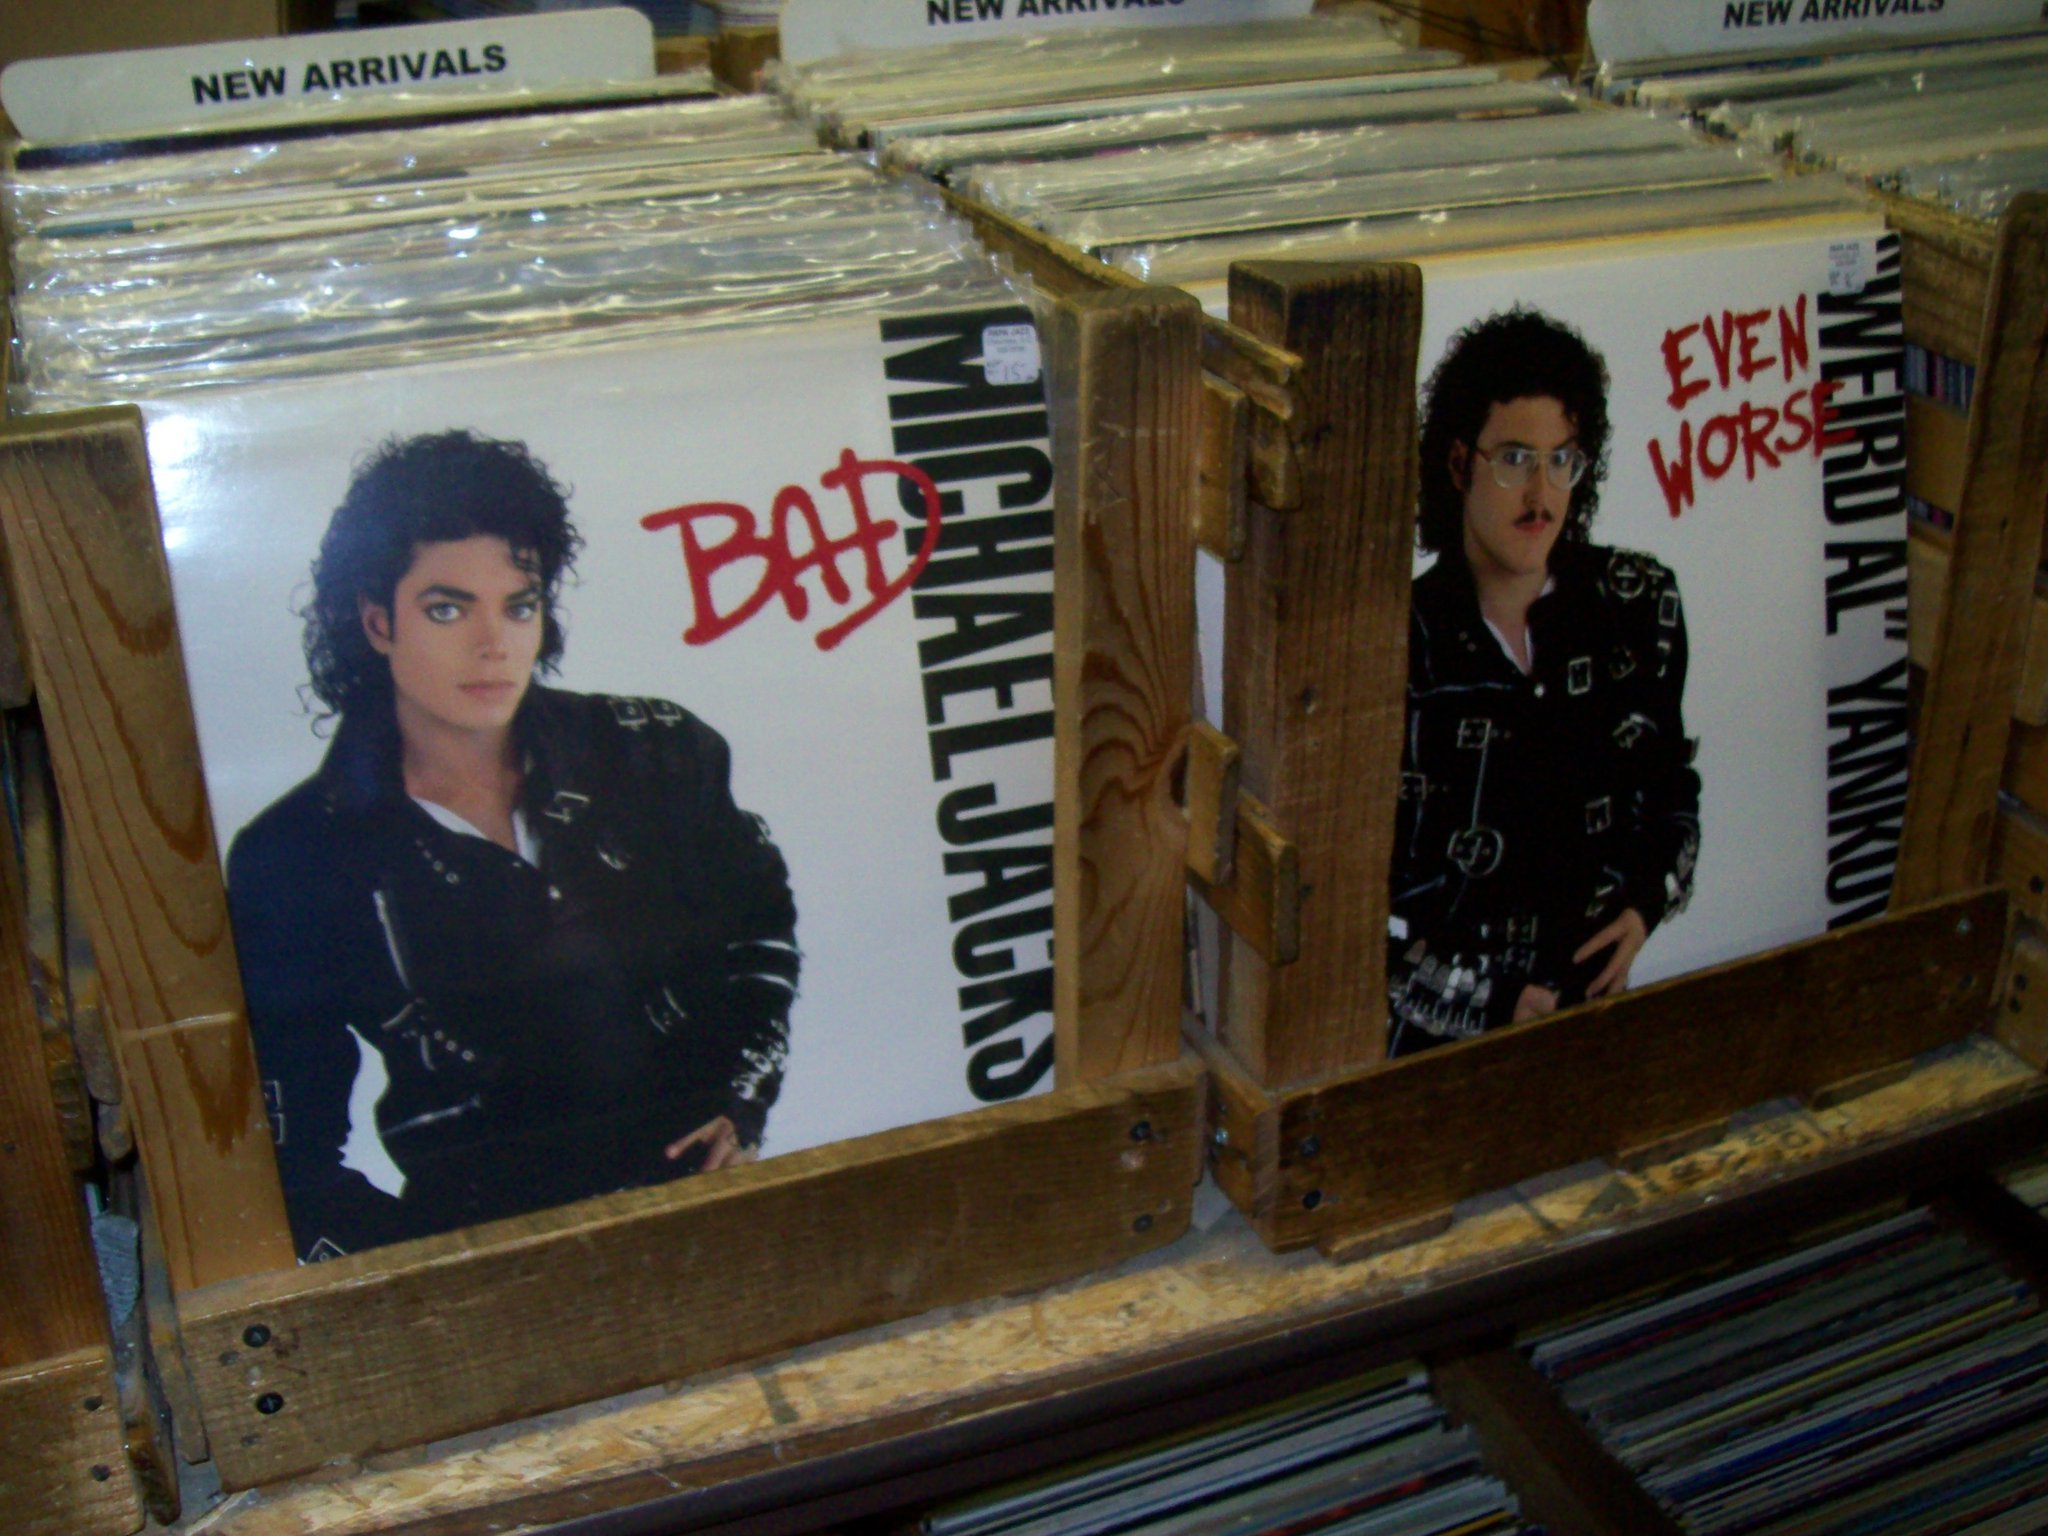 CD of Michael Jackson's BAD next to Weird Al Yankovic's EVEN WORSE